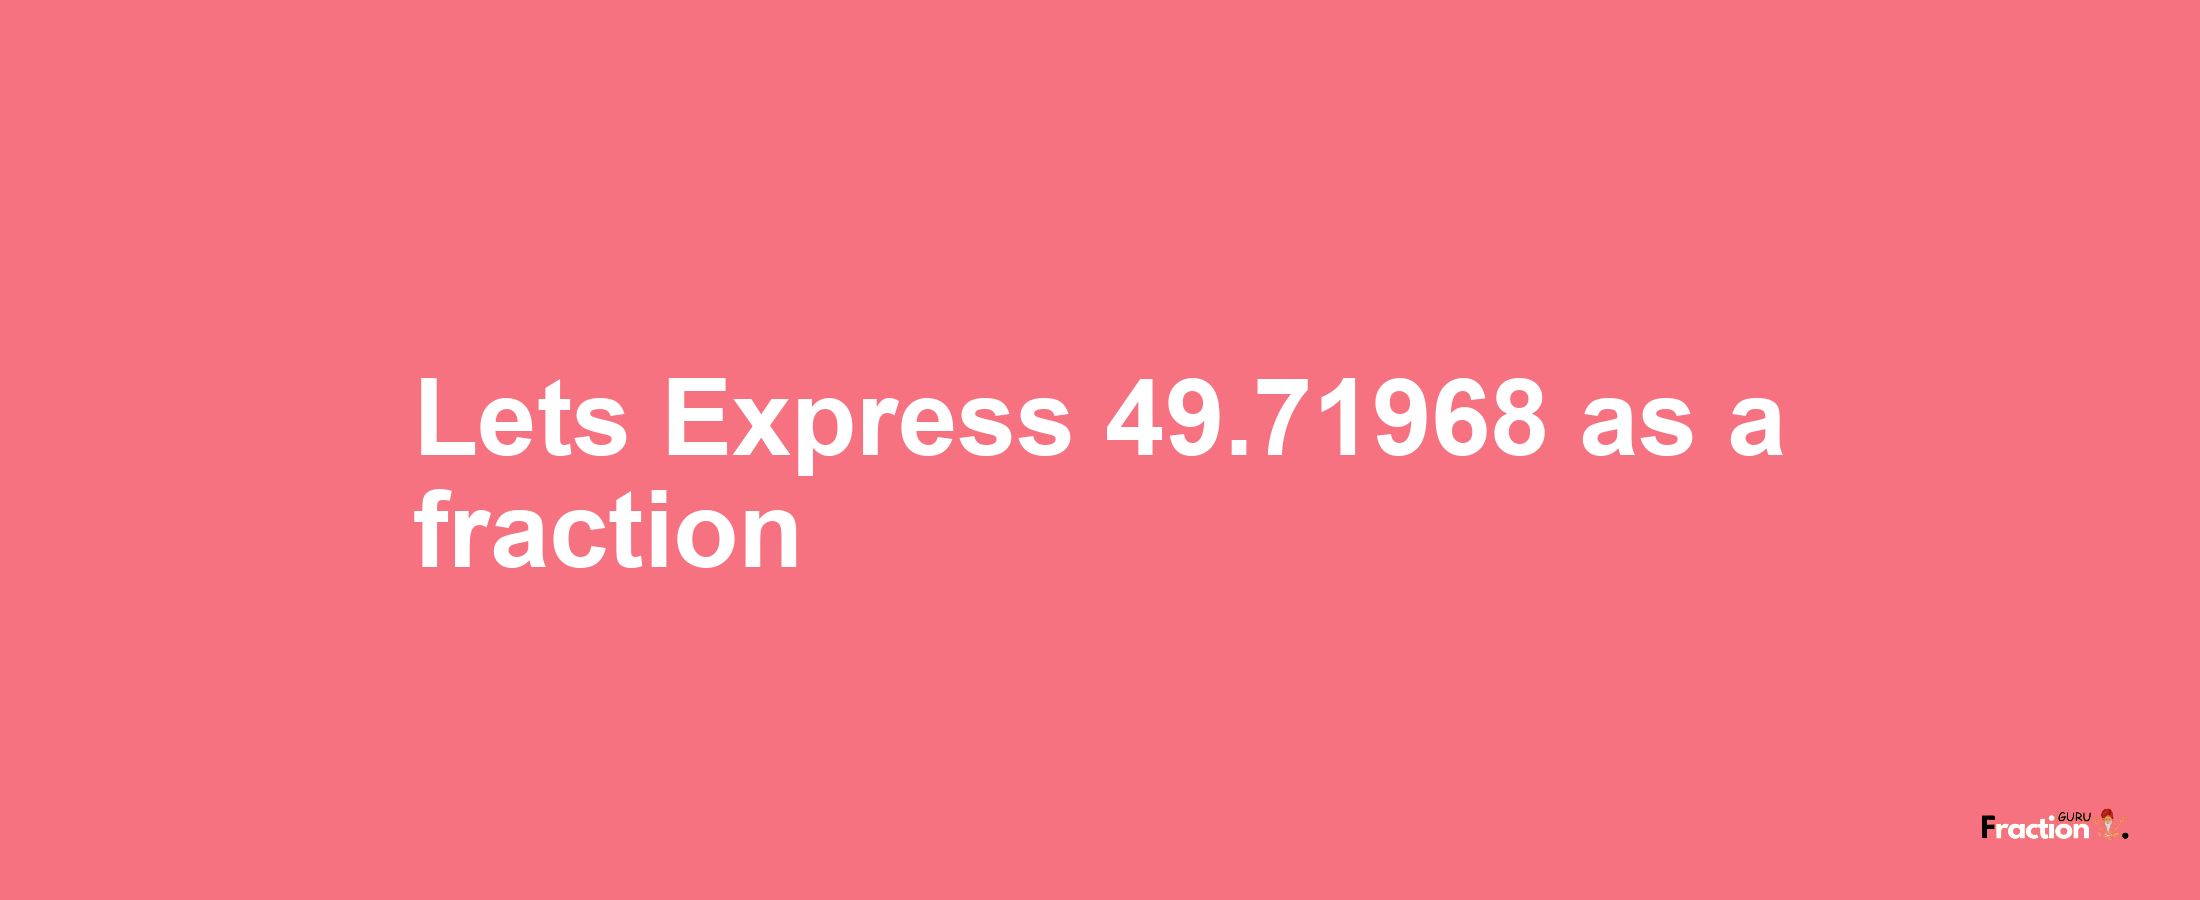 Lets Express 49.71968 as afraction